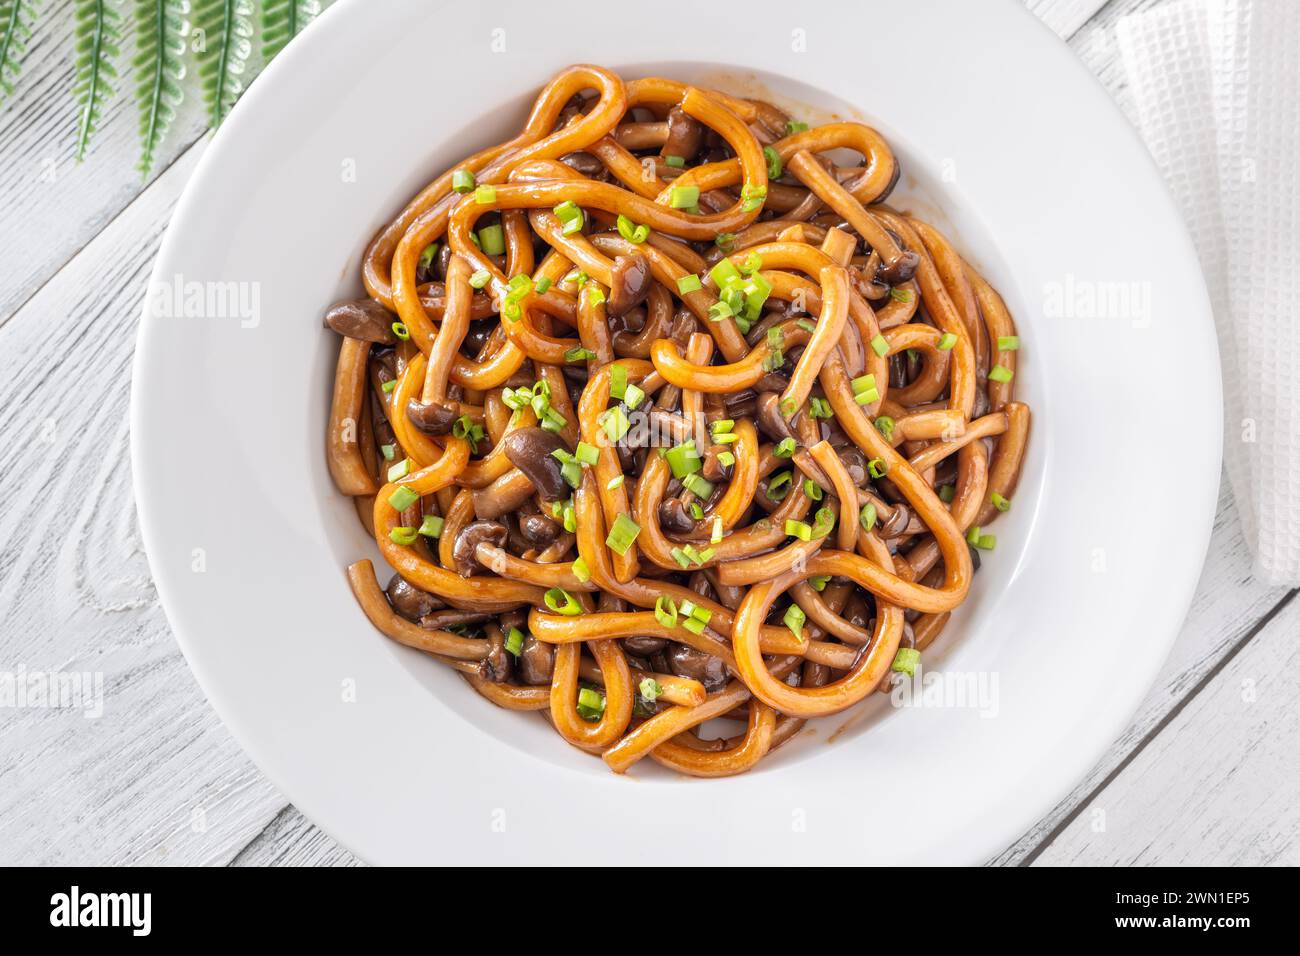 Portion of udon noodles with brown beach mushrooms Stock Photo